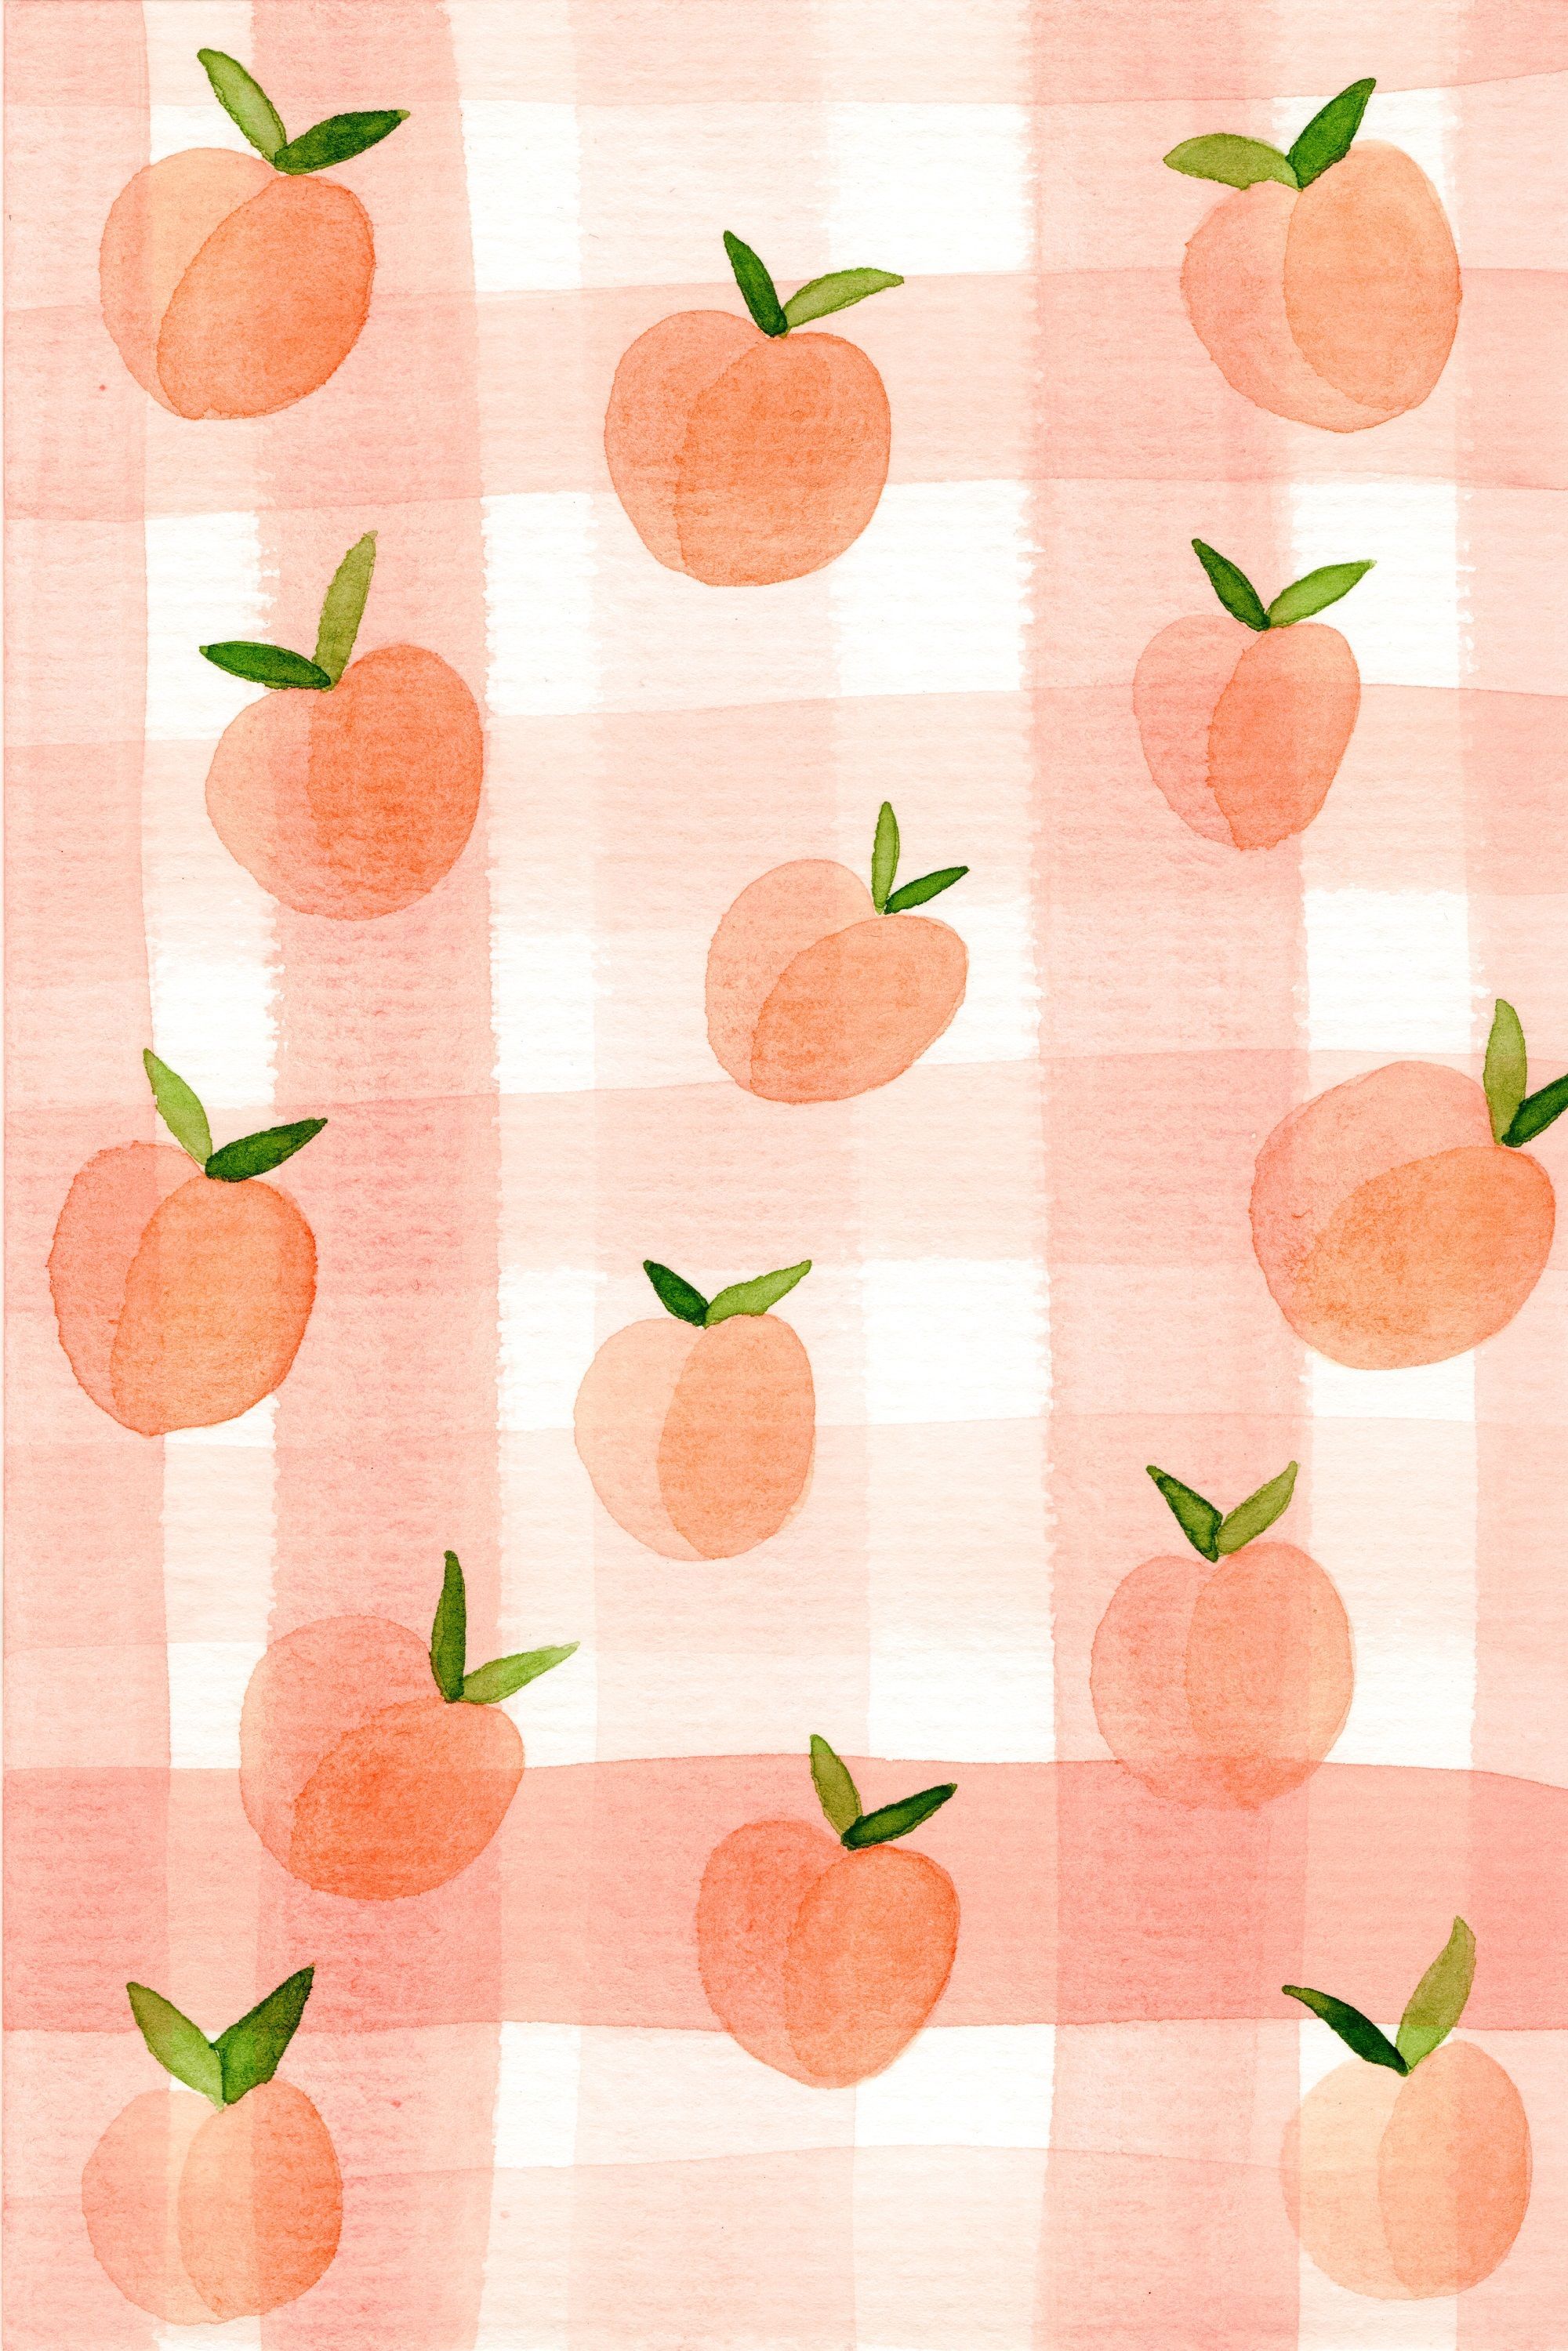 Peaches Wallpaper Vector Images over 4800